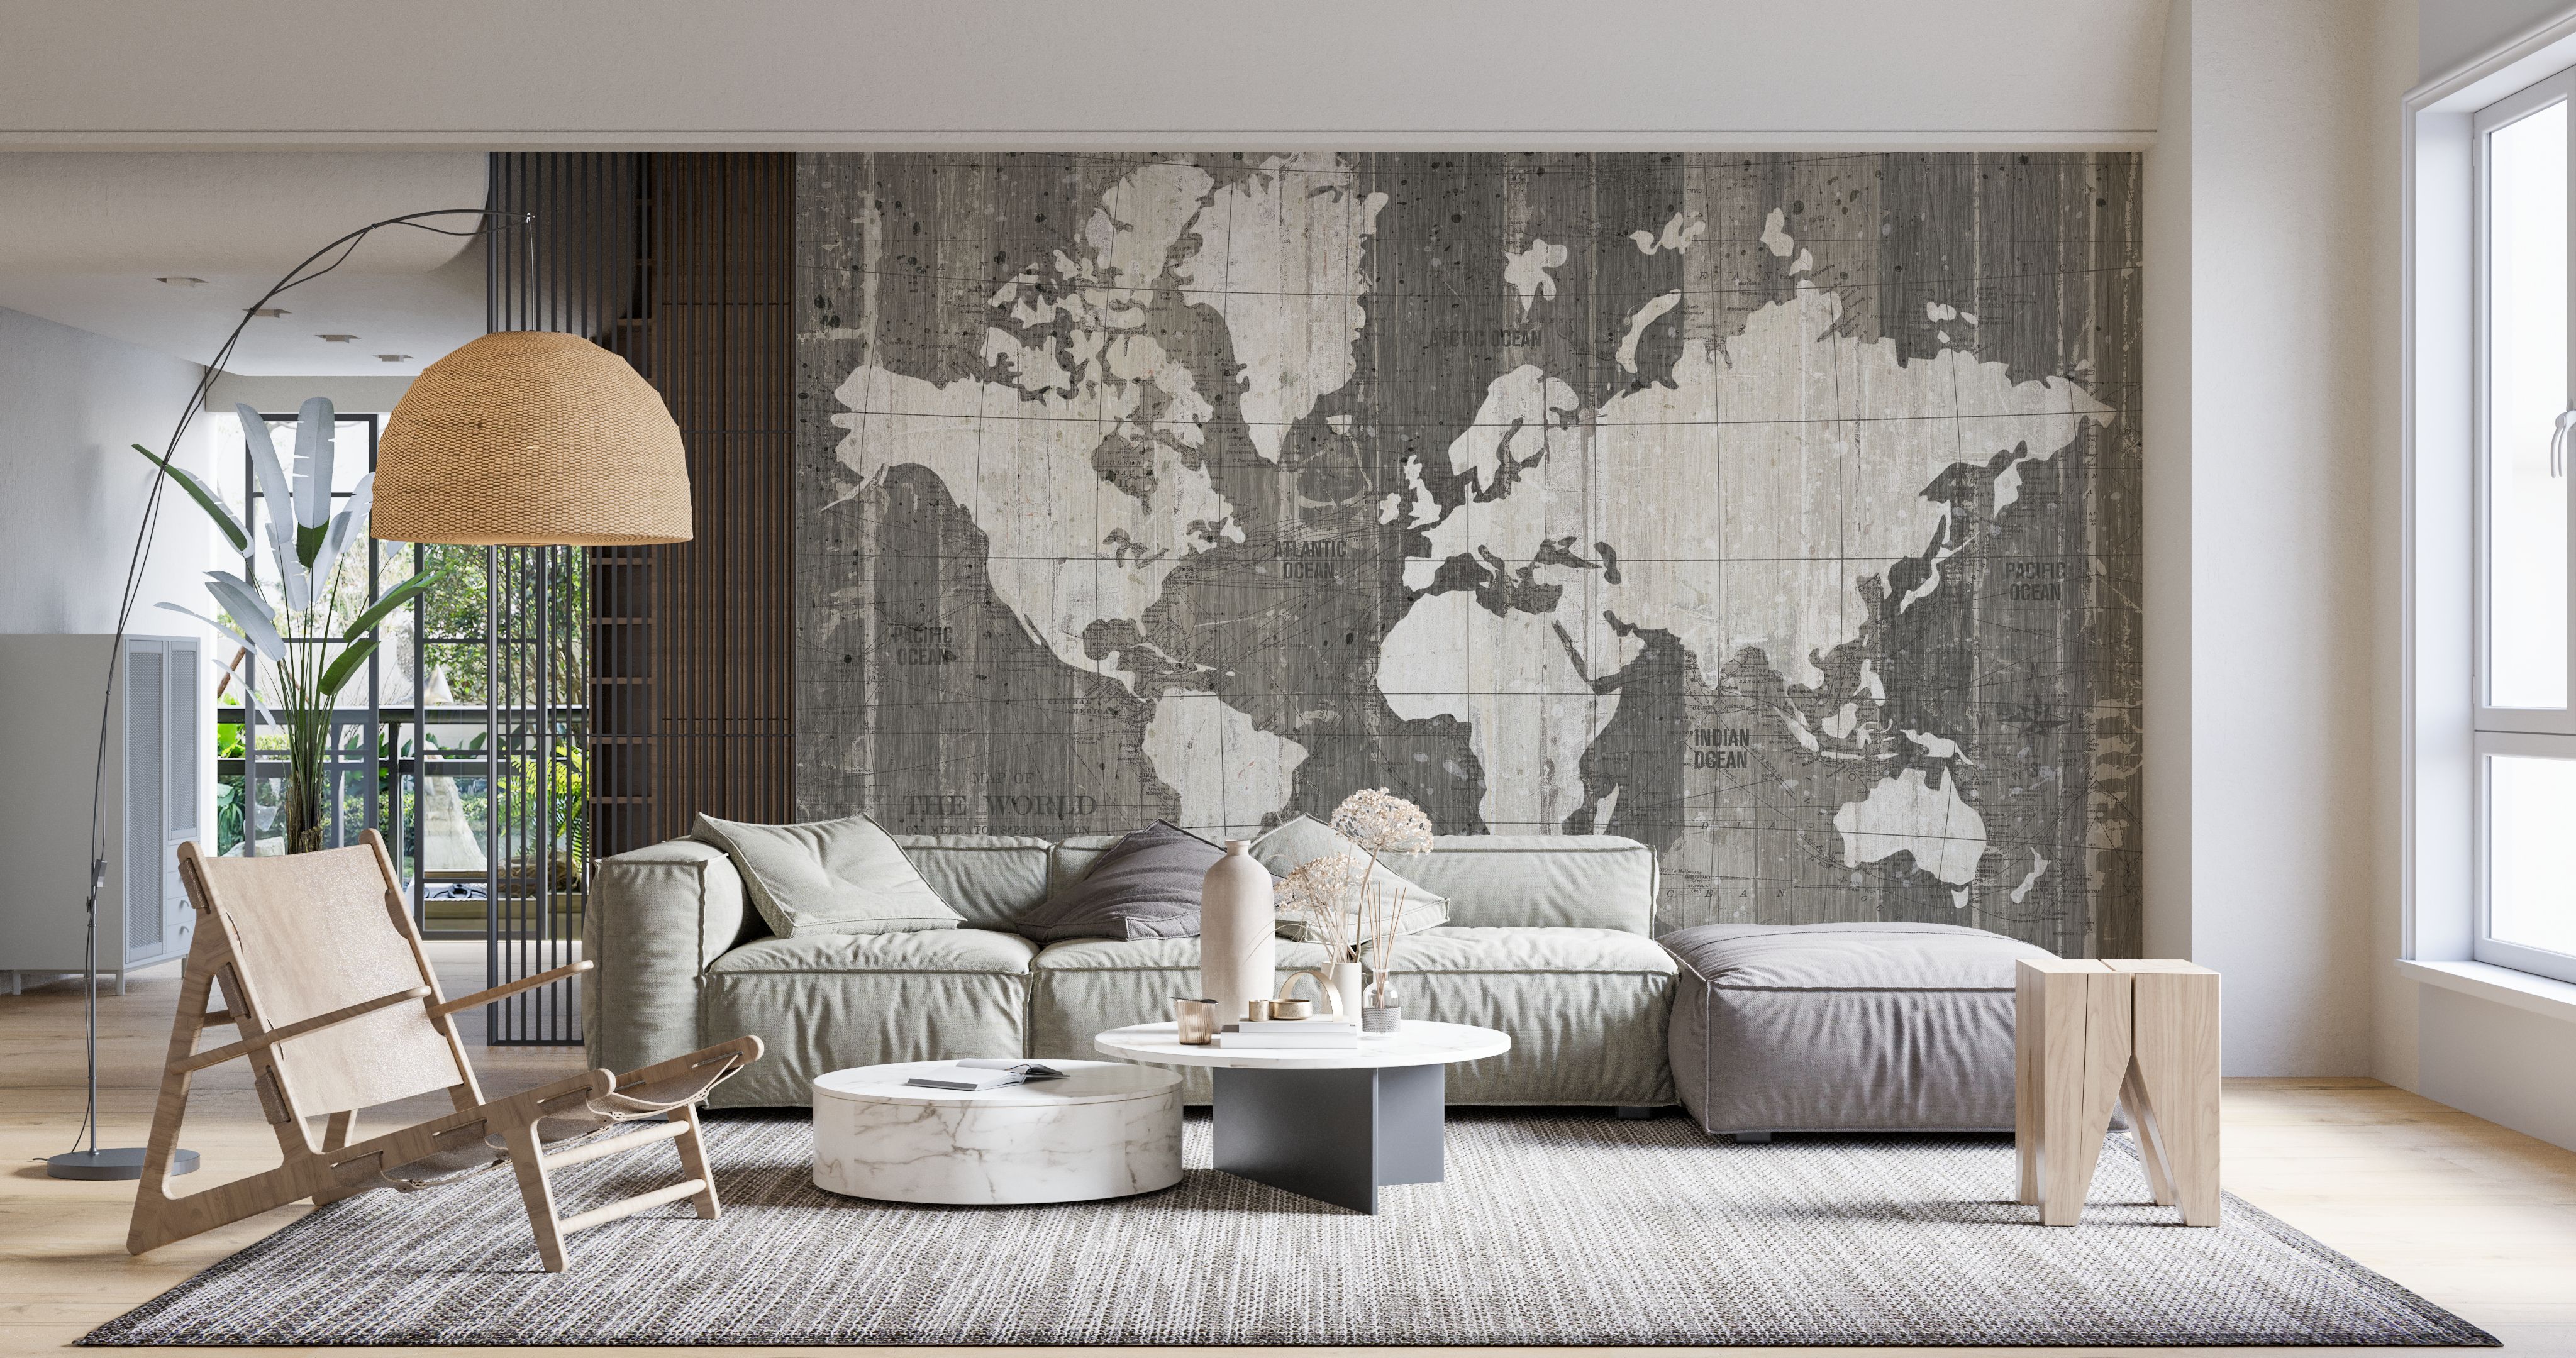 Old Planisphere Wall Mural - 6' 9 x 4' 5 (81 x 53) - 2 Panels